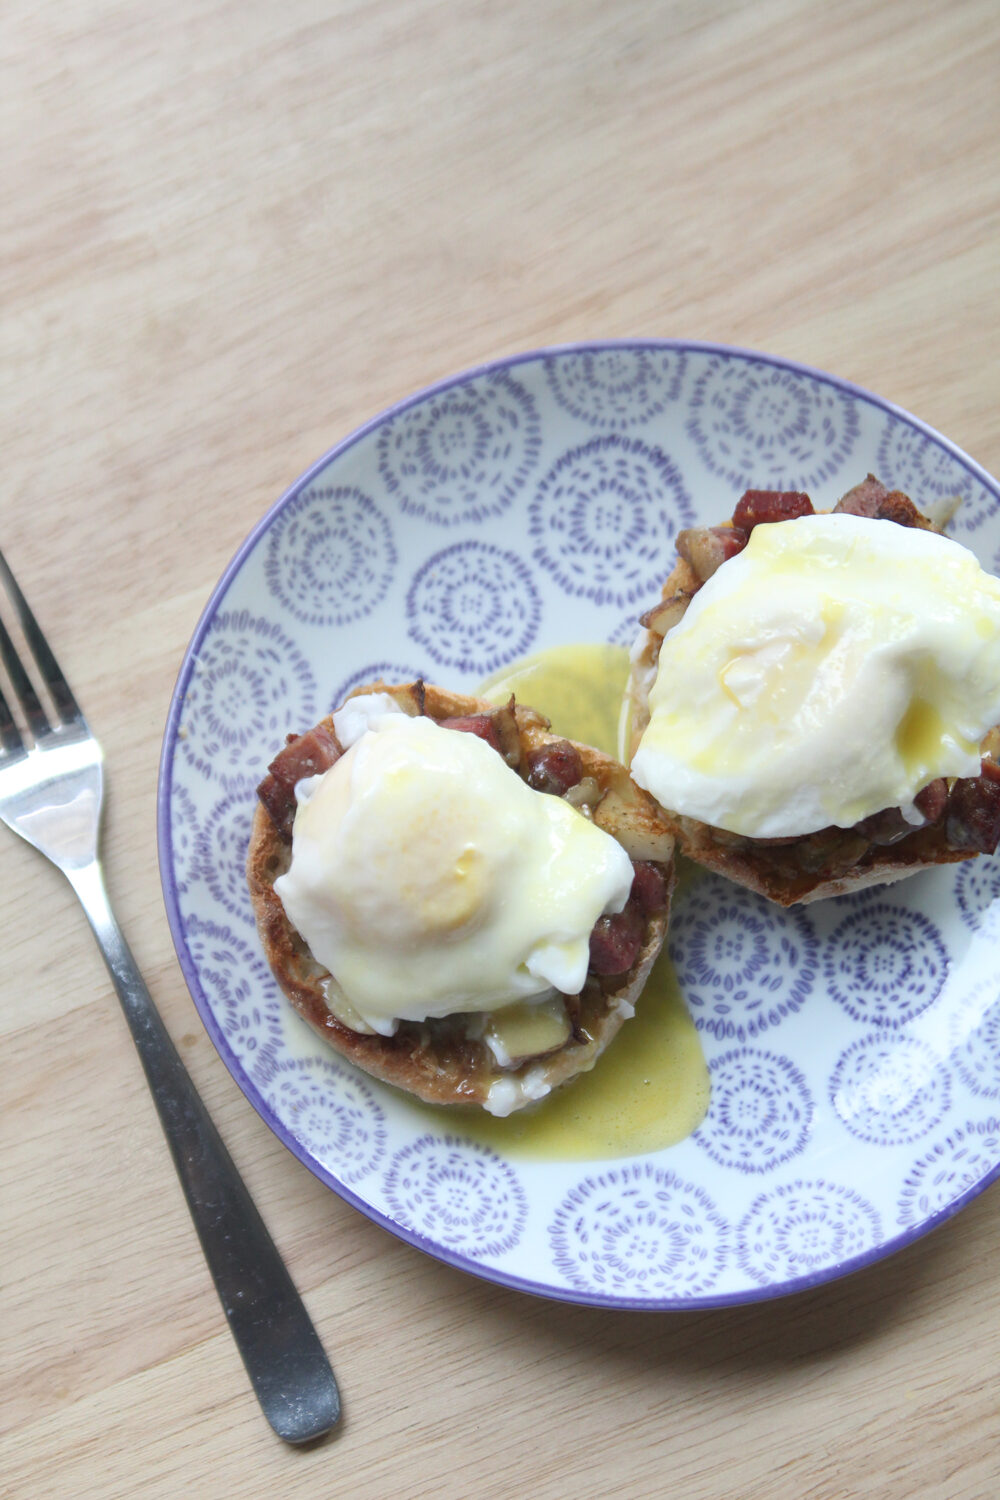 A plate with a purple and white design is shown with two light brown English muffin halves topped with brown corned beef hash, white eggs and yellow hollandaise sauce. A fork sits nearby.